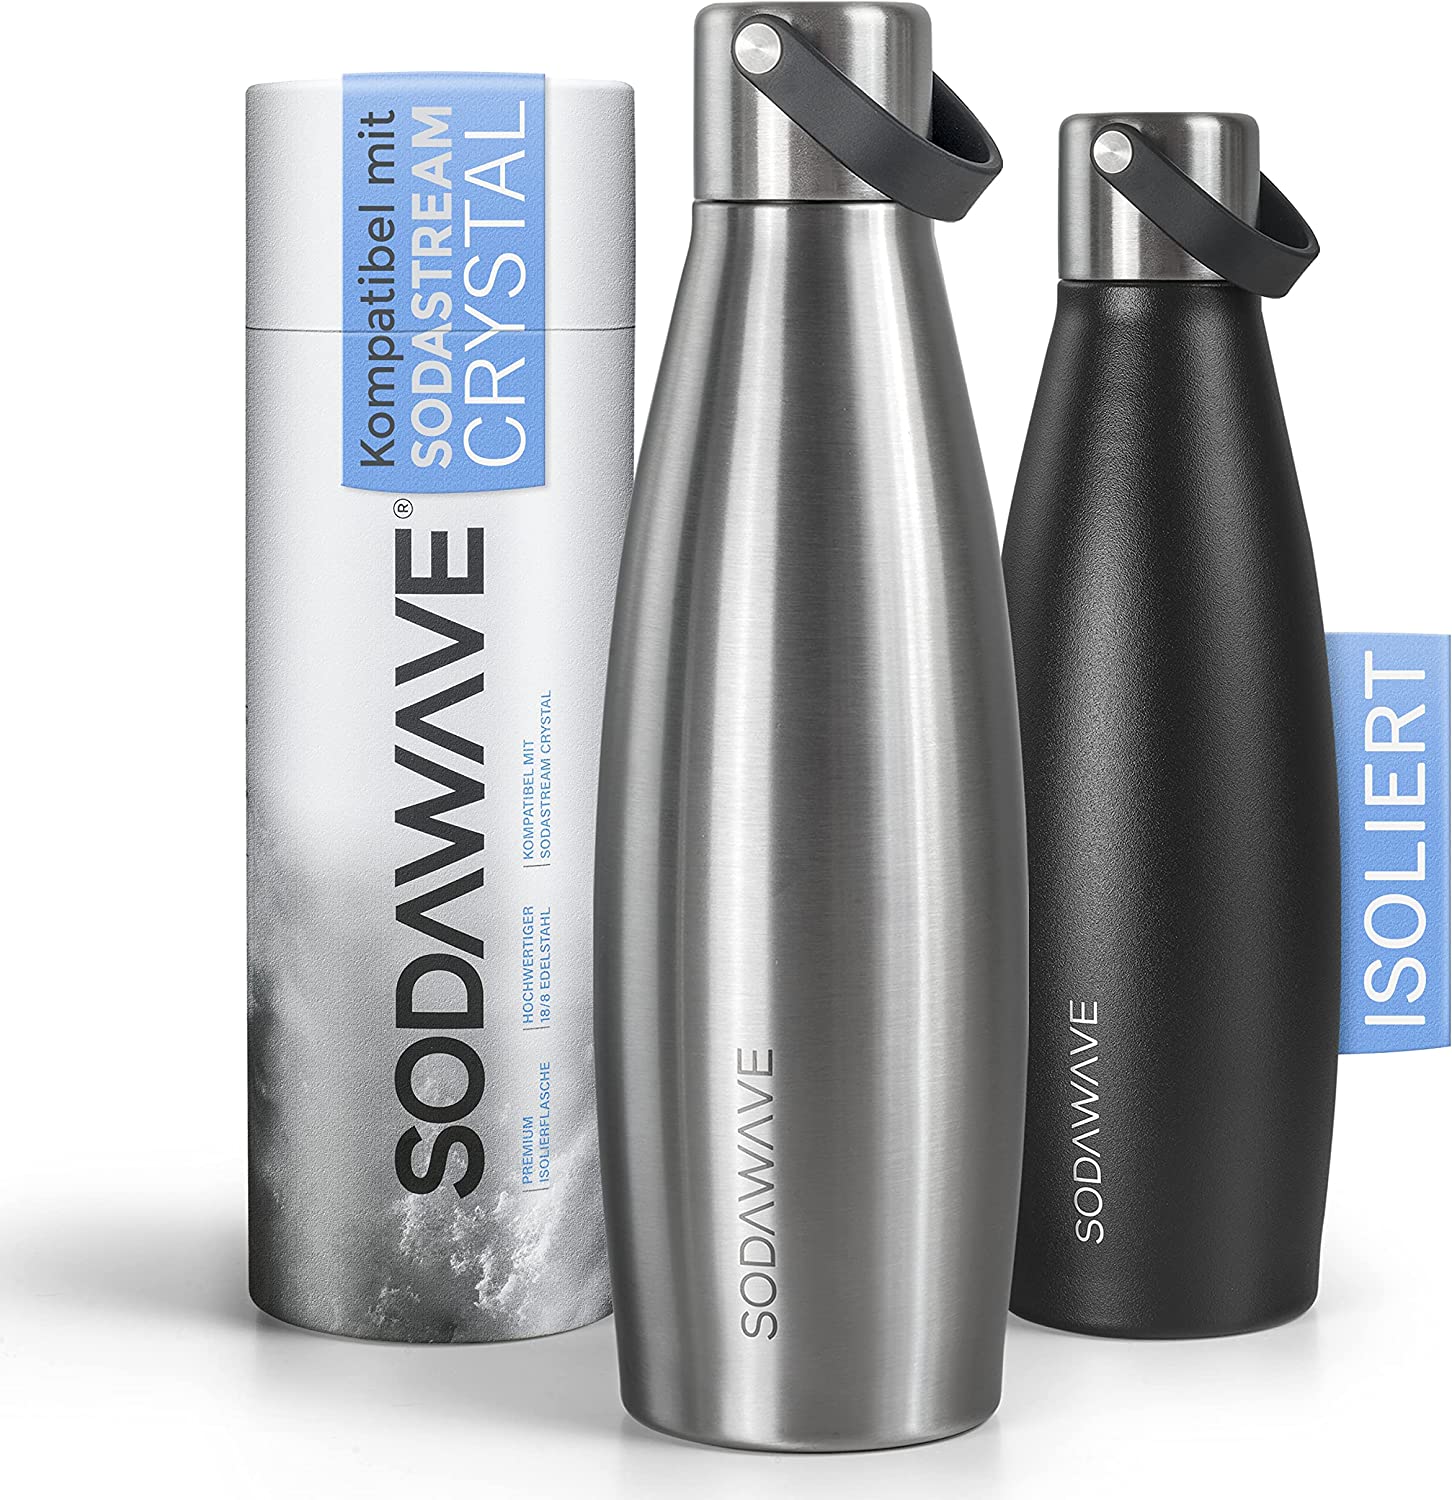 SODAWAVE® Stainless Steel Water Bottle [620 ml] Compatible with SodaStream Crystal 2.0, Double-Walled Thermal Stainless Steel Drinking Bottle, 100% Leak-Proof Bottle, Ideal for Travel (Stainless Steel)